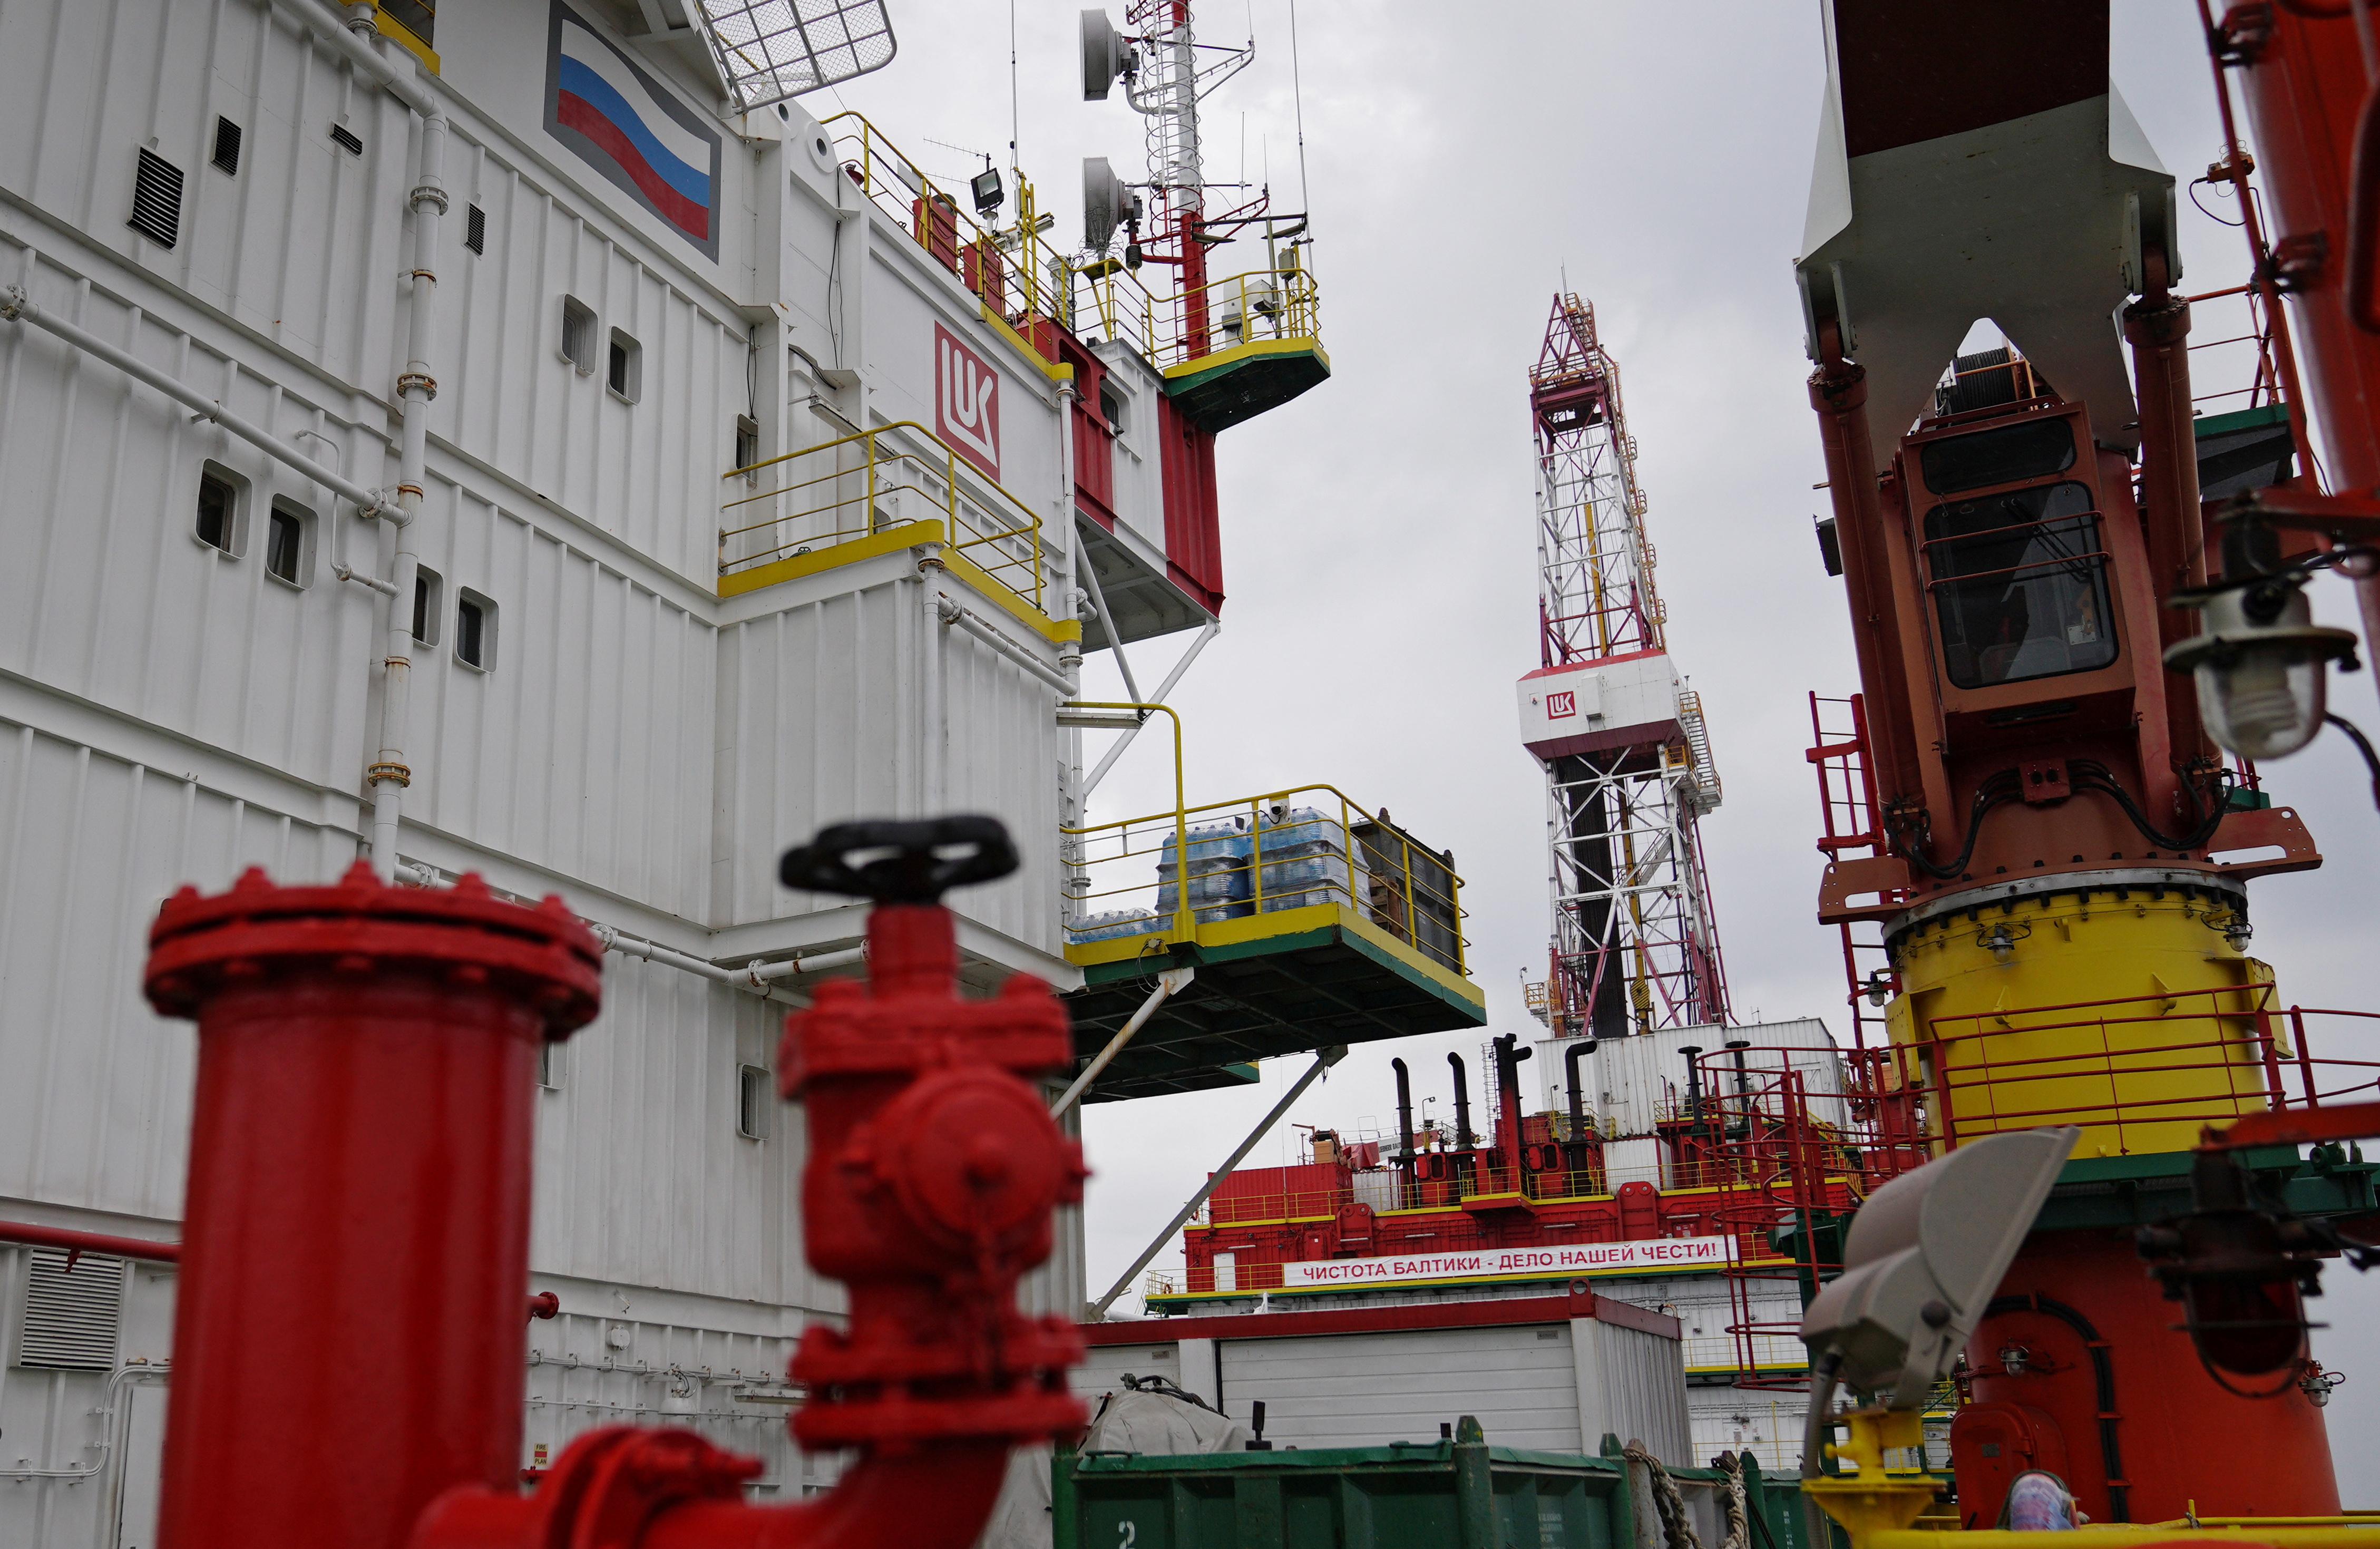 A view shows a section of an oil platform operated by Lukoil company at the Kravtsovskoye oilfield in the Baltic Sea